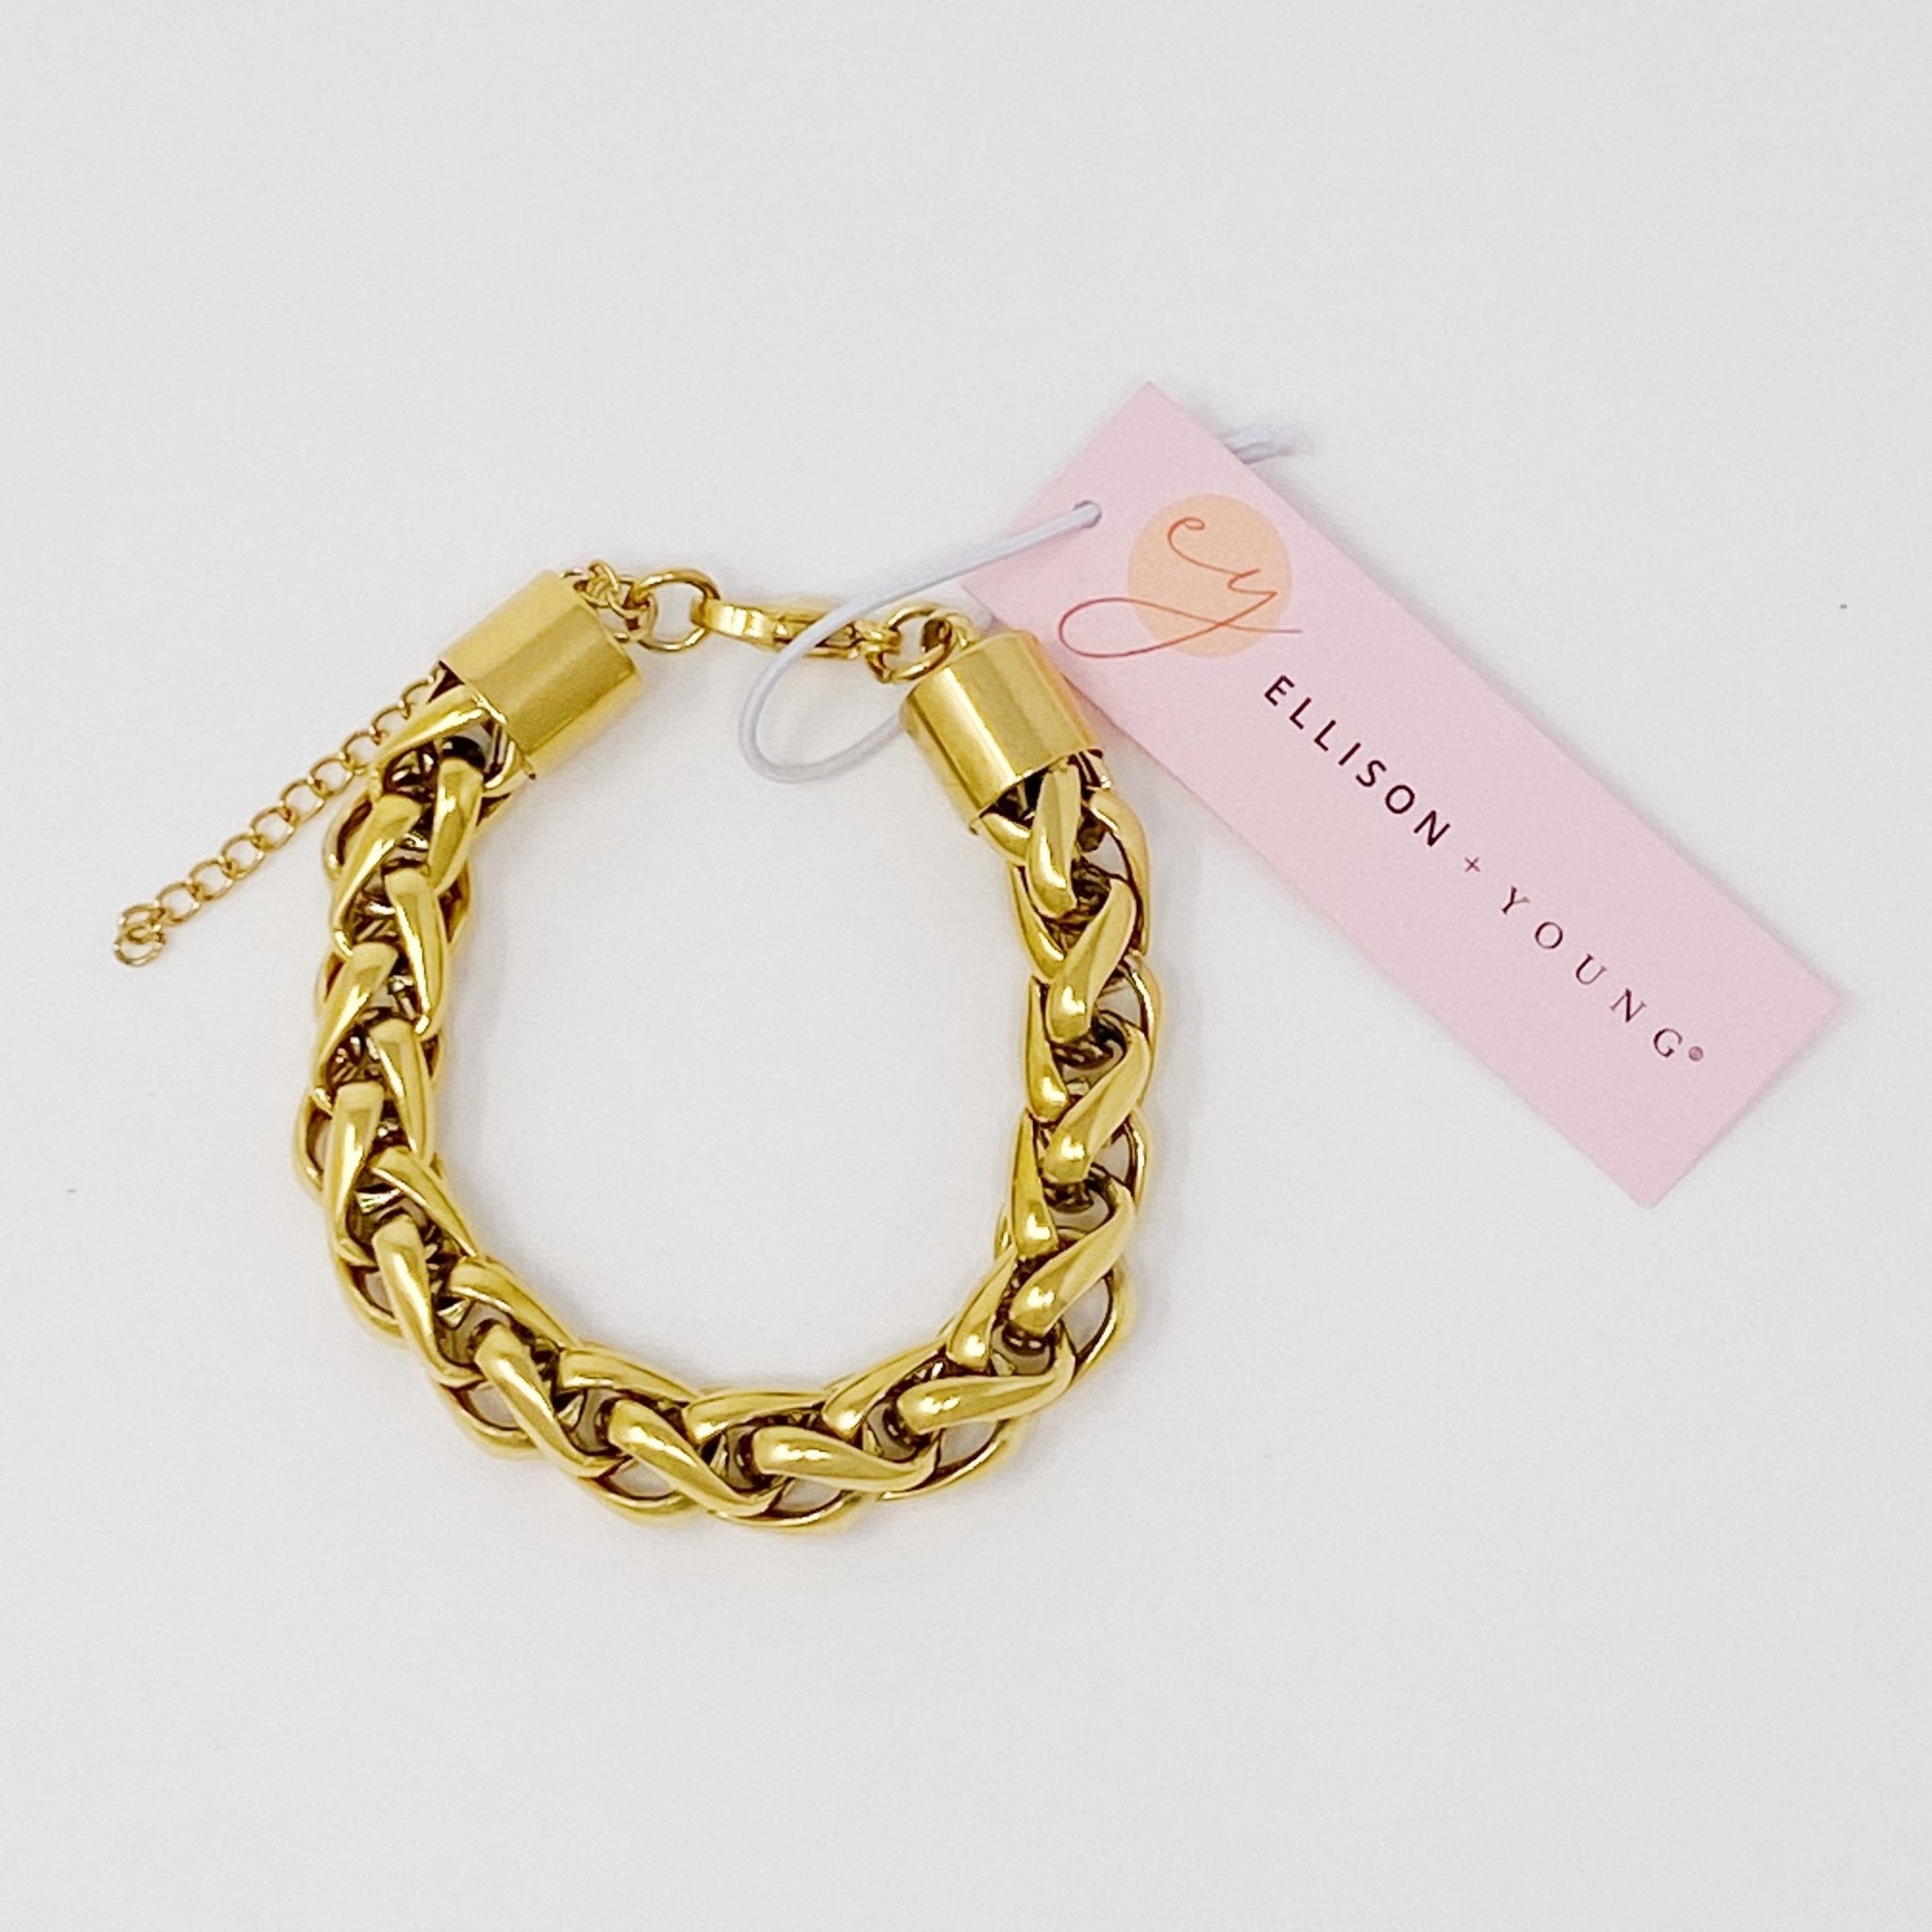 Bold And Edgy Chain Bracelet - The Kindness Cause